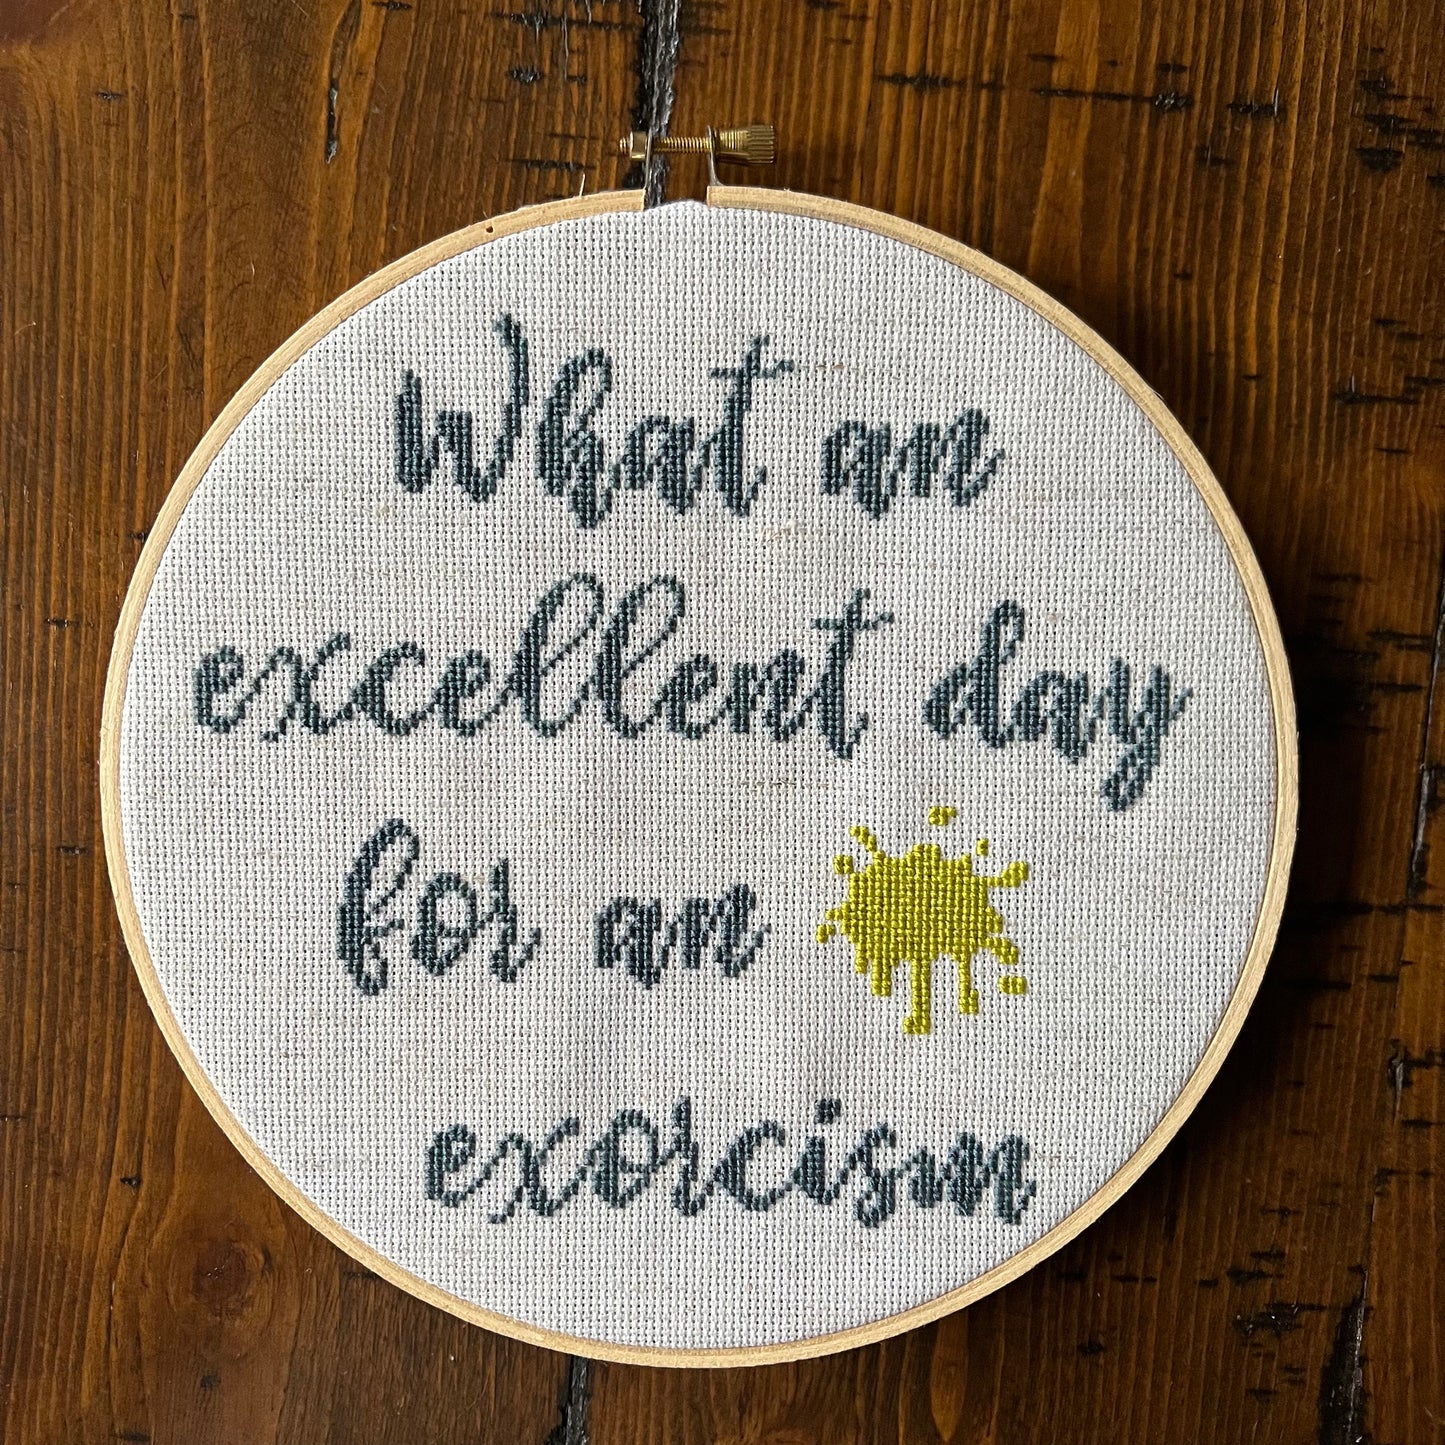 What An Excellent Day For An Exorcism 8” Hand Stitched Cross Stitch Hoop